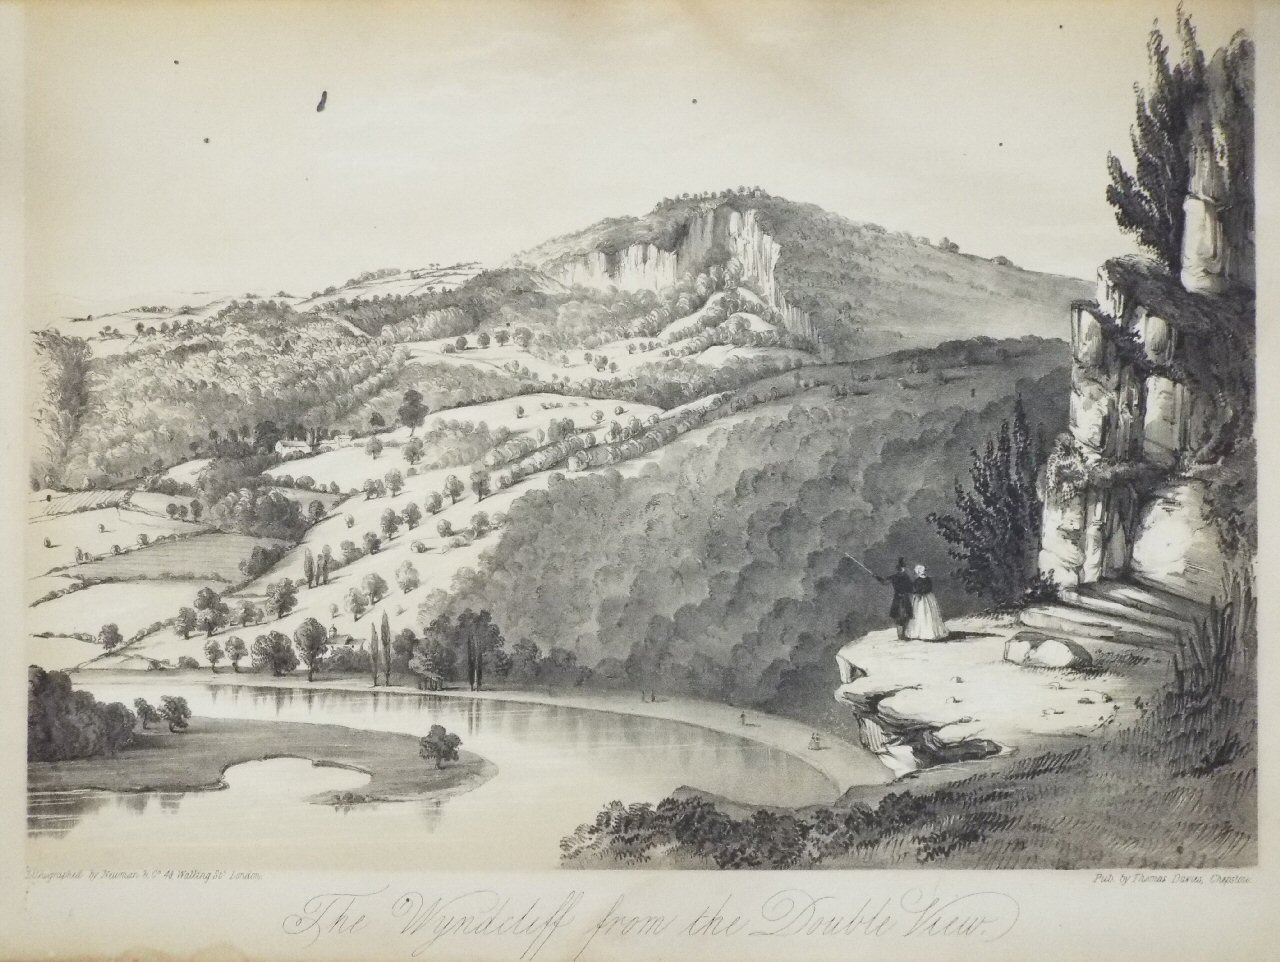 Lithograph - The Wyndcliff from the Double View. - Newman